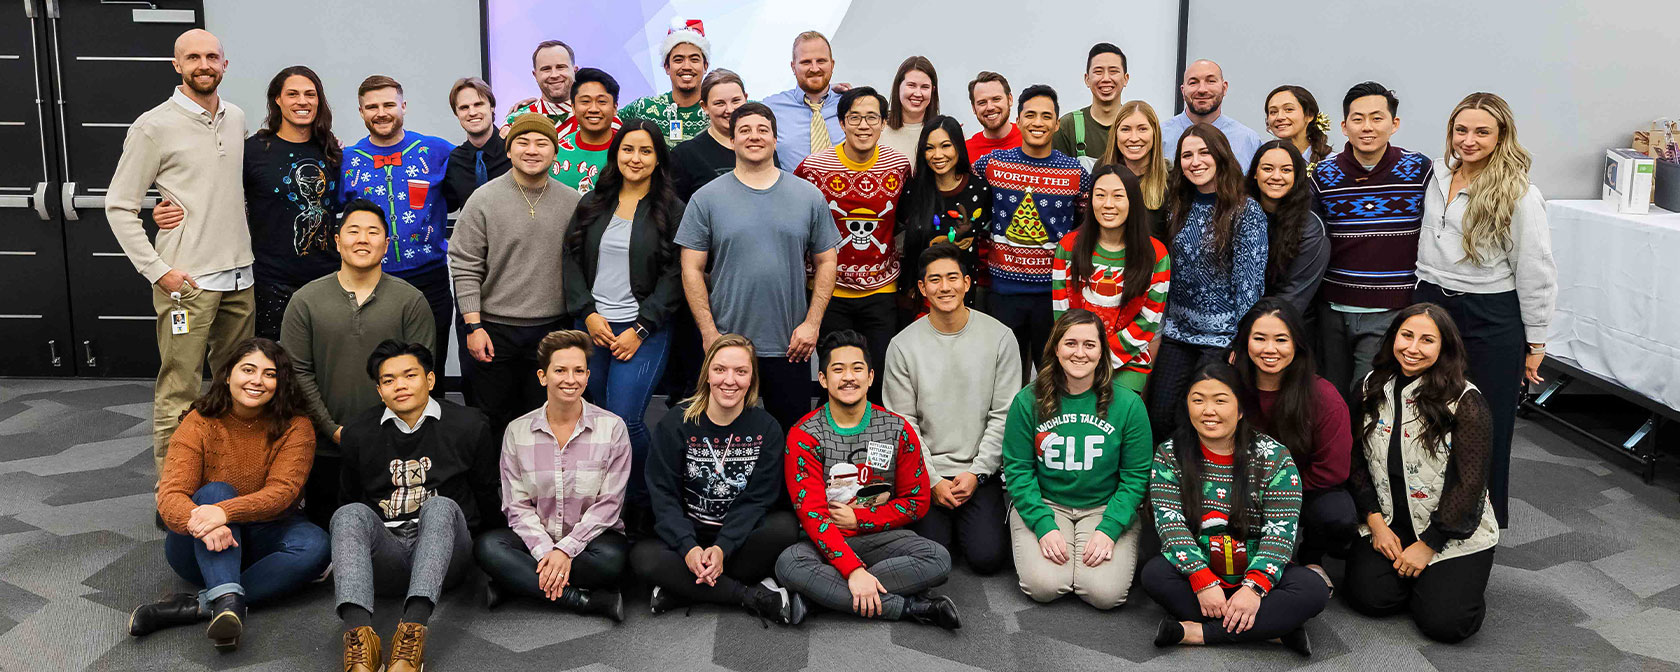 Physical Therapy students gather for a photo in their holiday sweaters during the DPT holiday celebration.